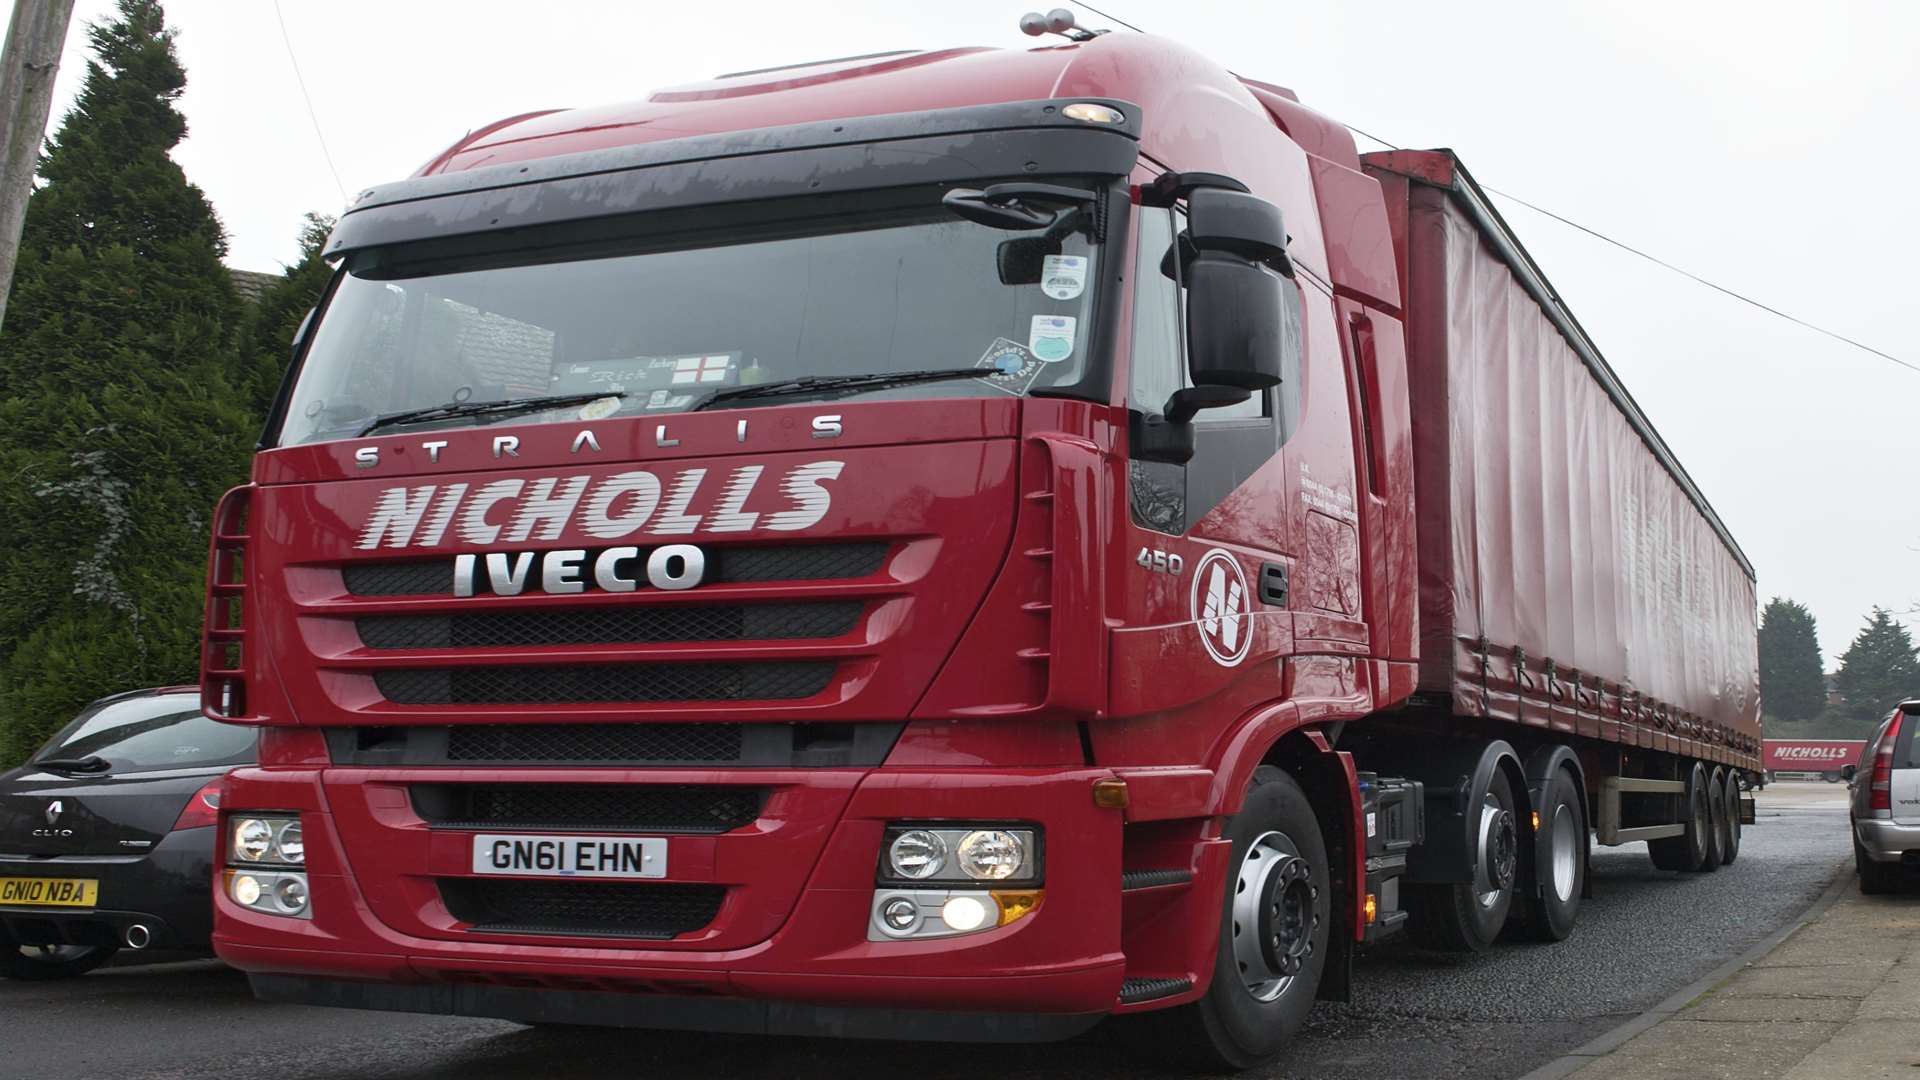 Nicholls Transport said the lower fuel costs do not directly translate to bigger profits